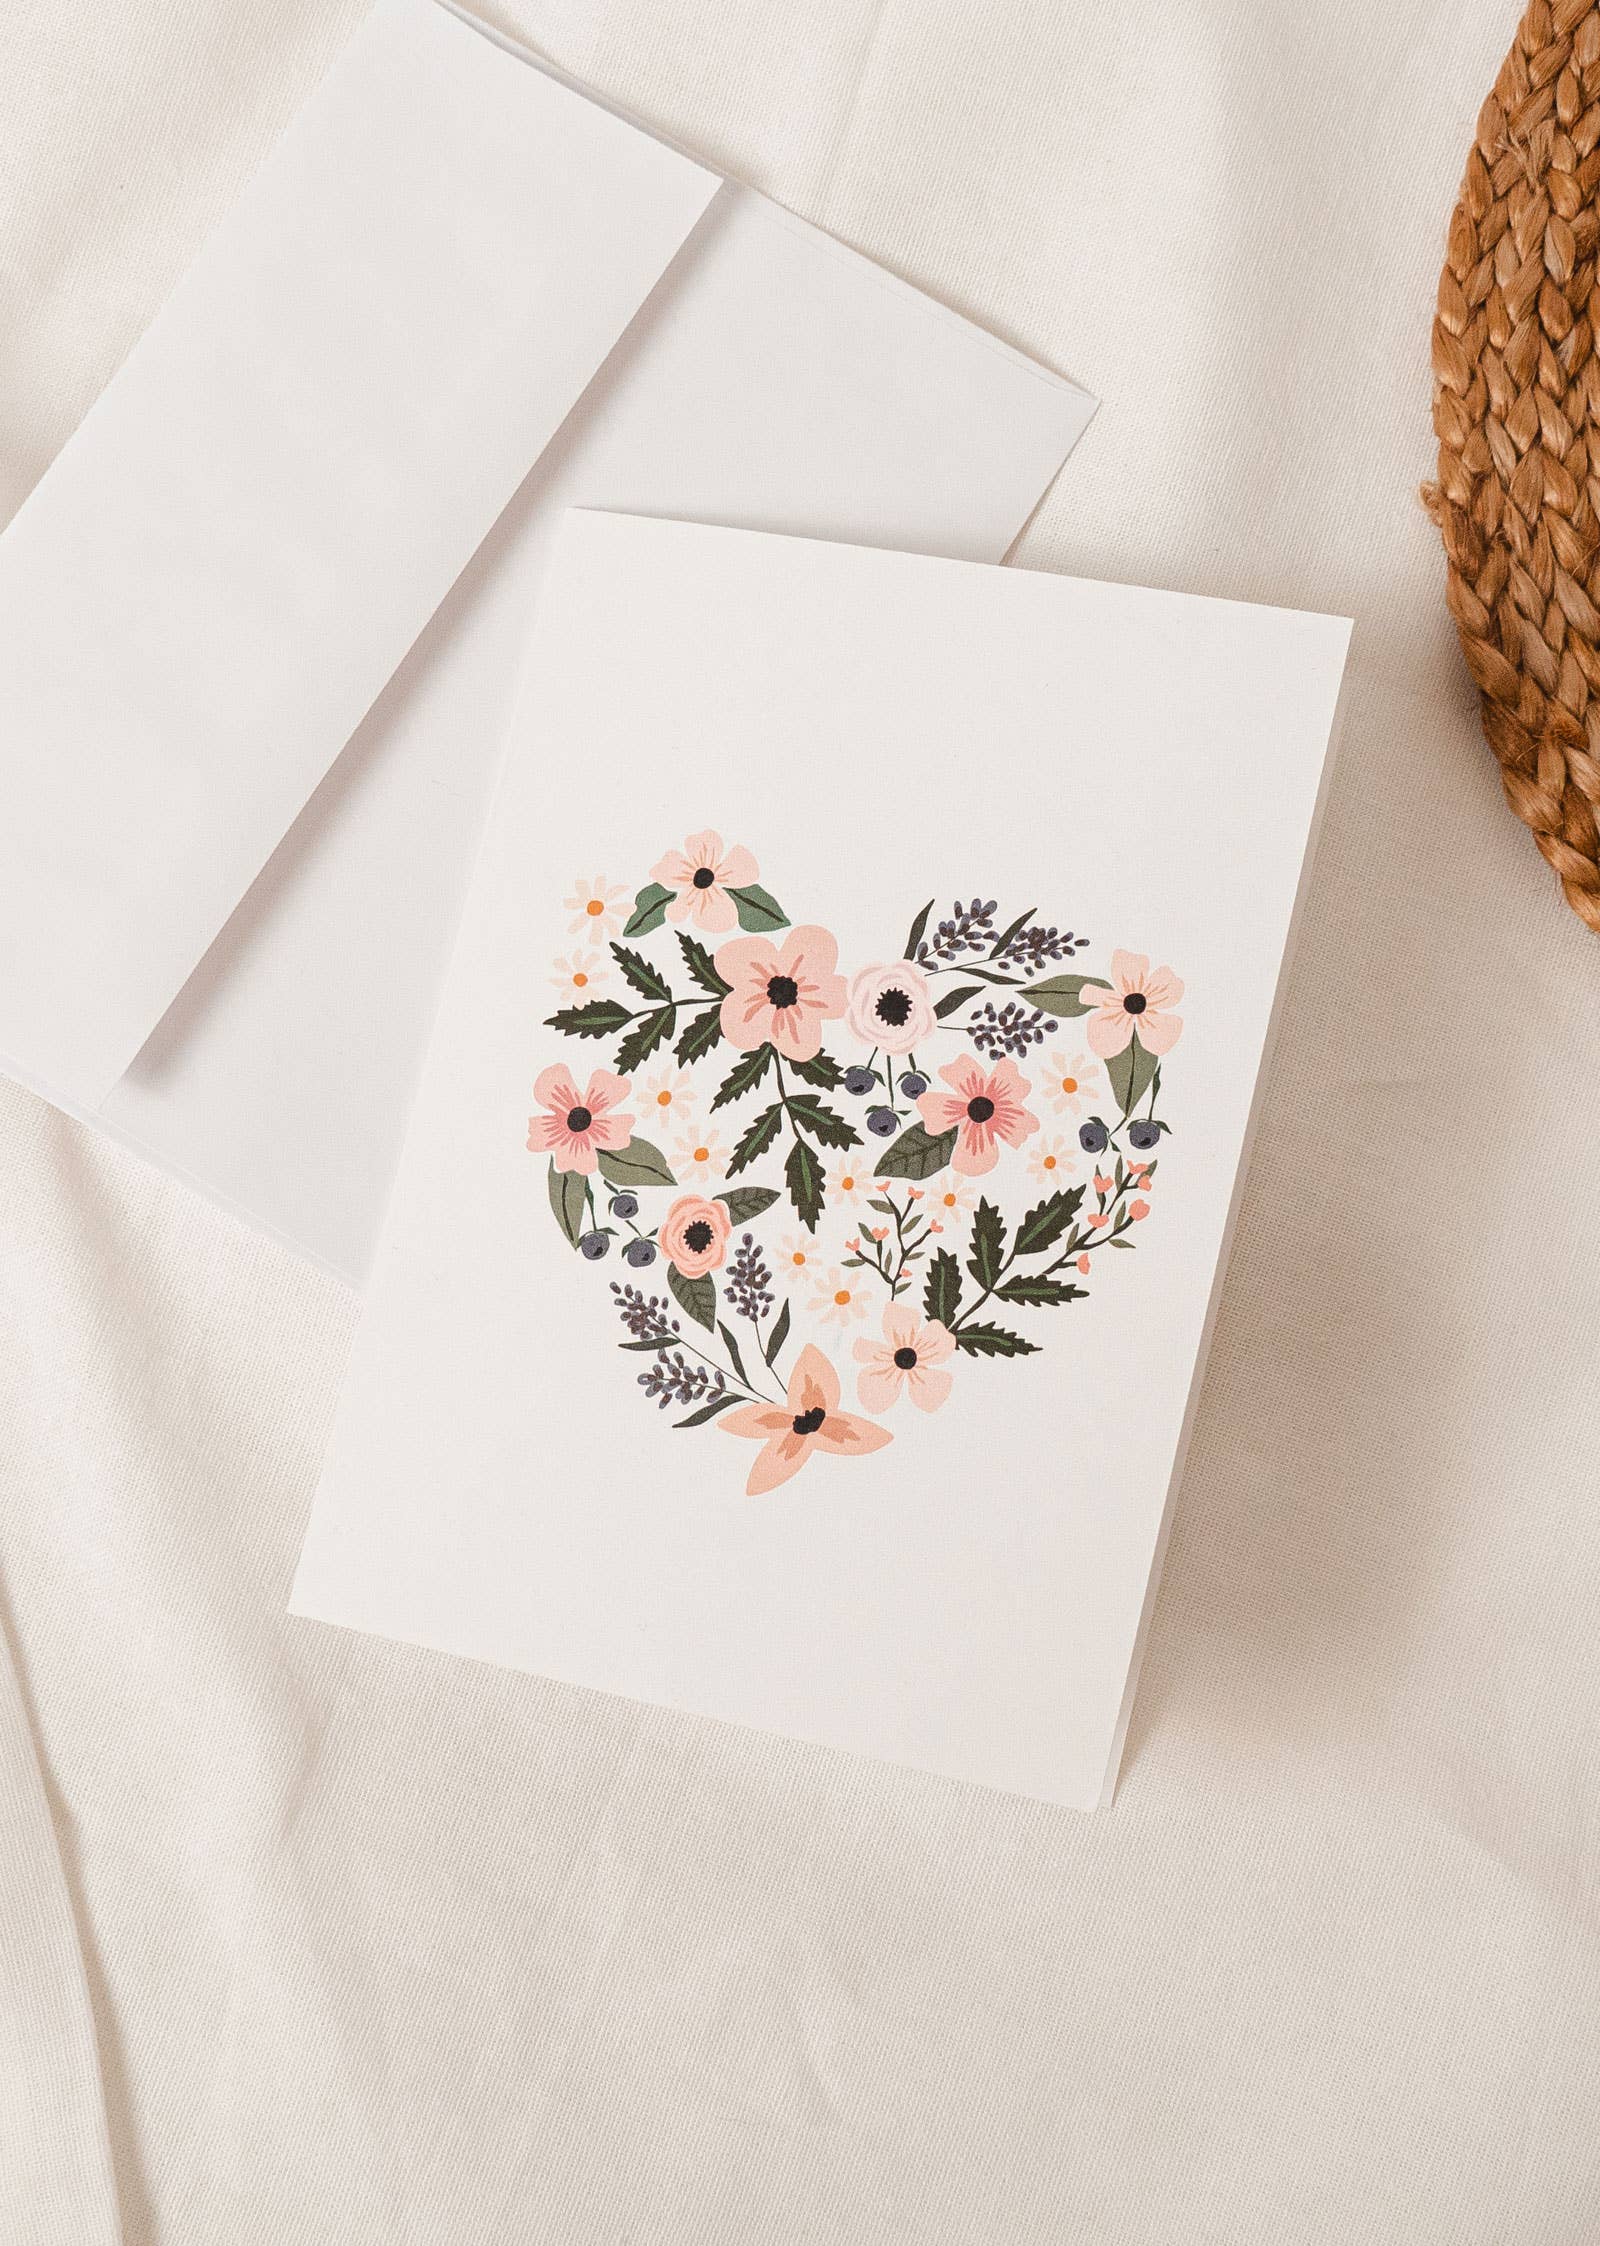 Mimi & August: Greeting Card - Heart Full of Flowers